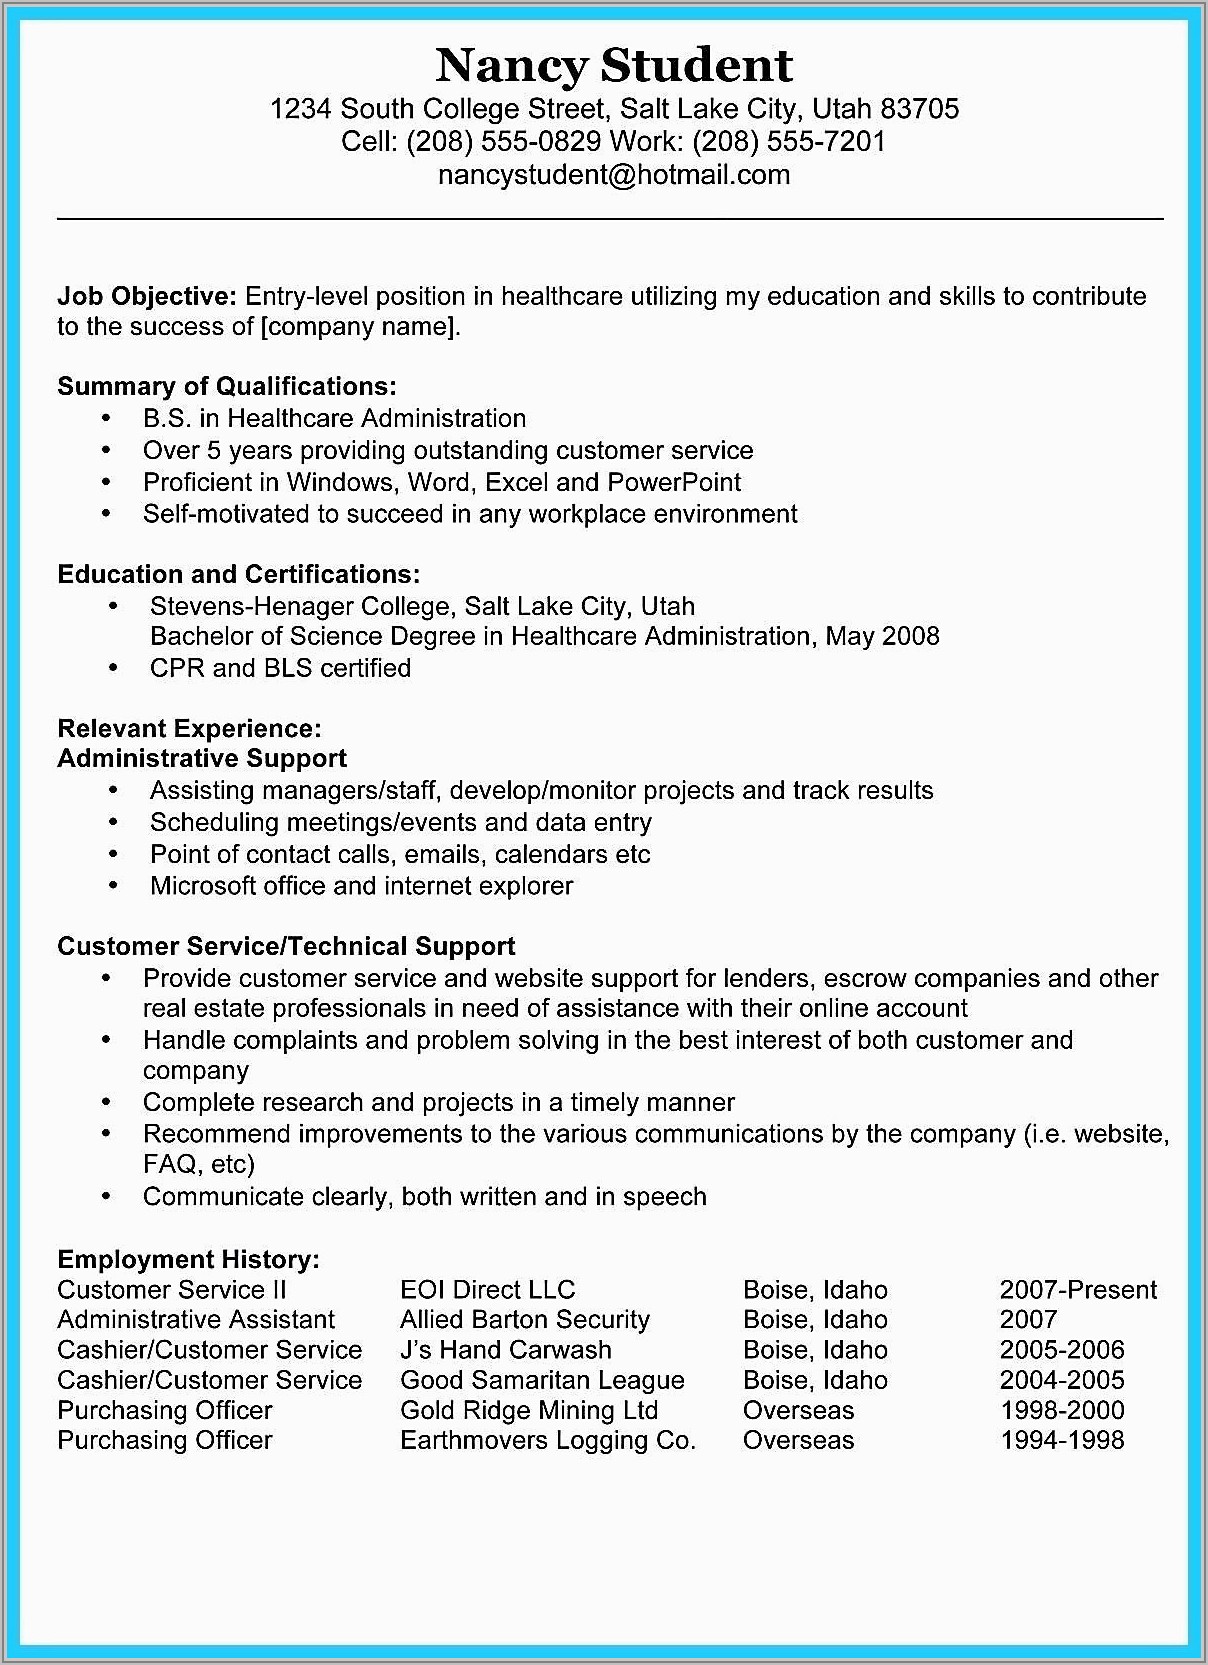 Resume Format Free Download For Students